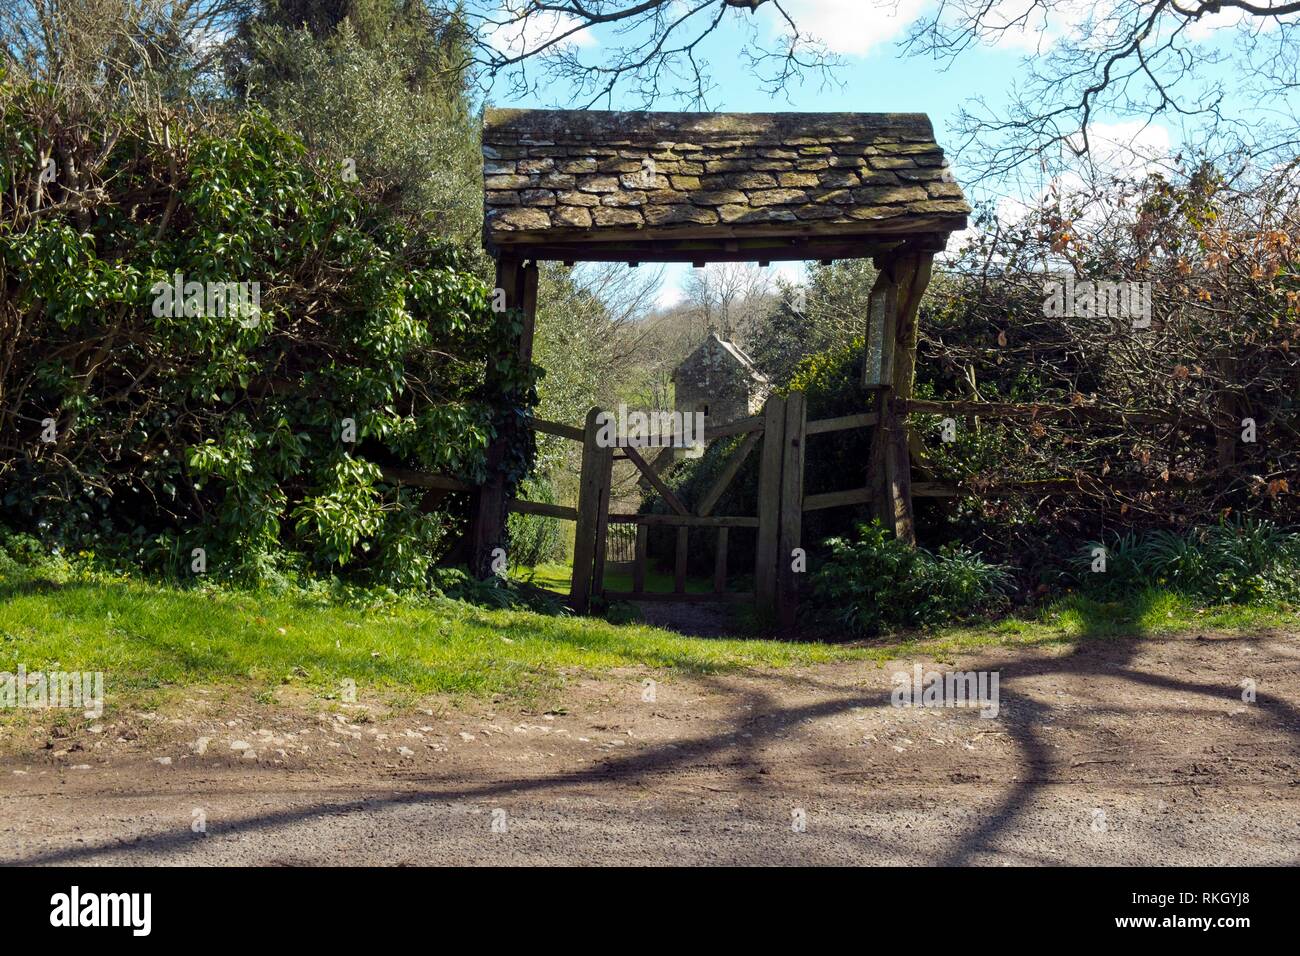 Spring sunshine on the picturesque lychgate to the tiny old Saxon church at Duntisbourne Rouse in the Cotswolds, Gloucestershire, UK. Stock Photo